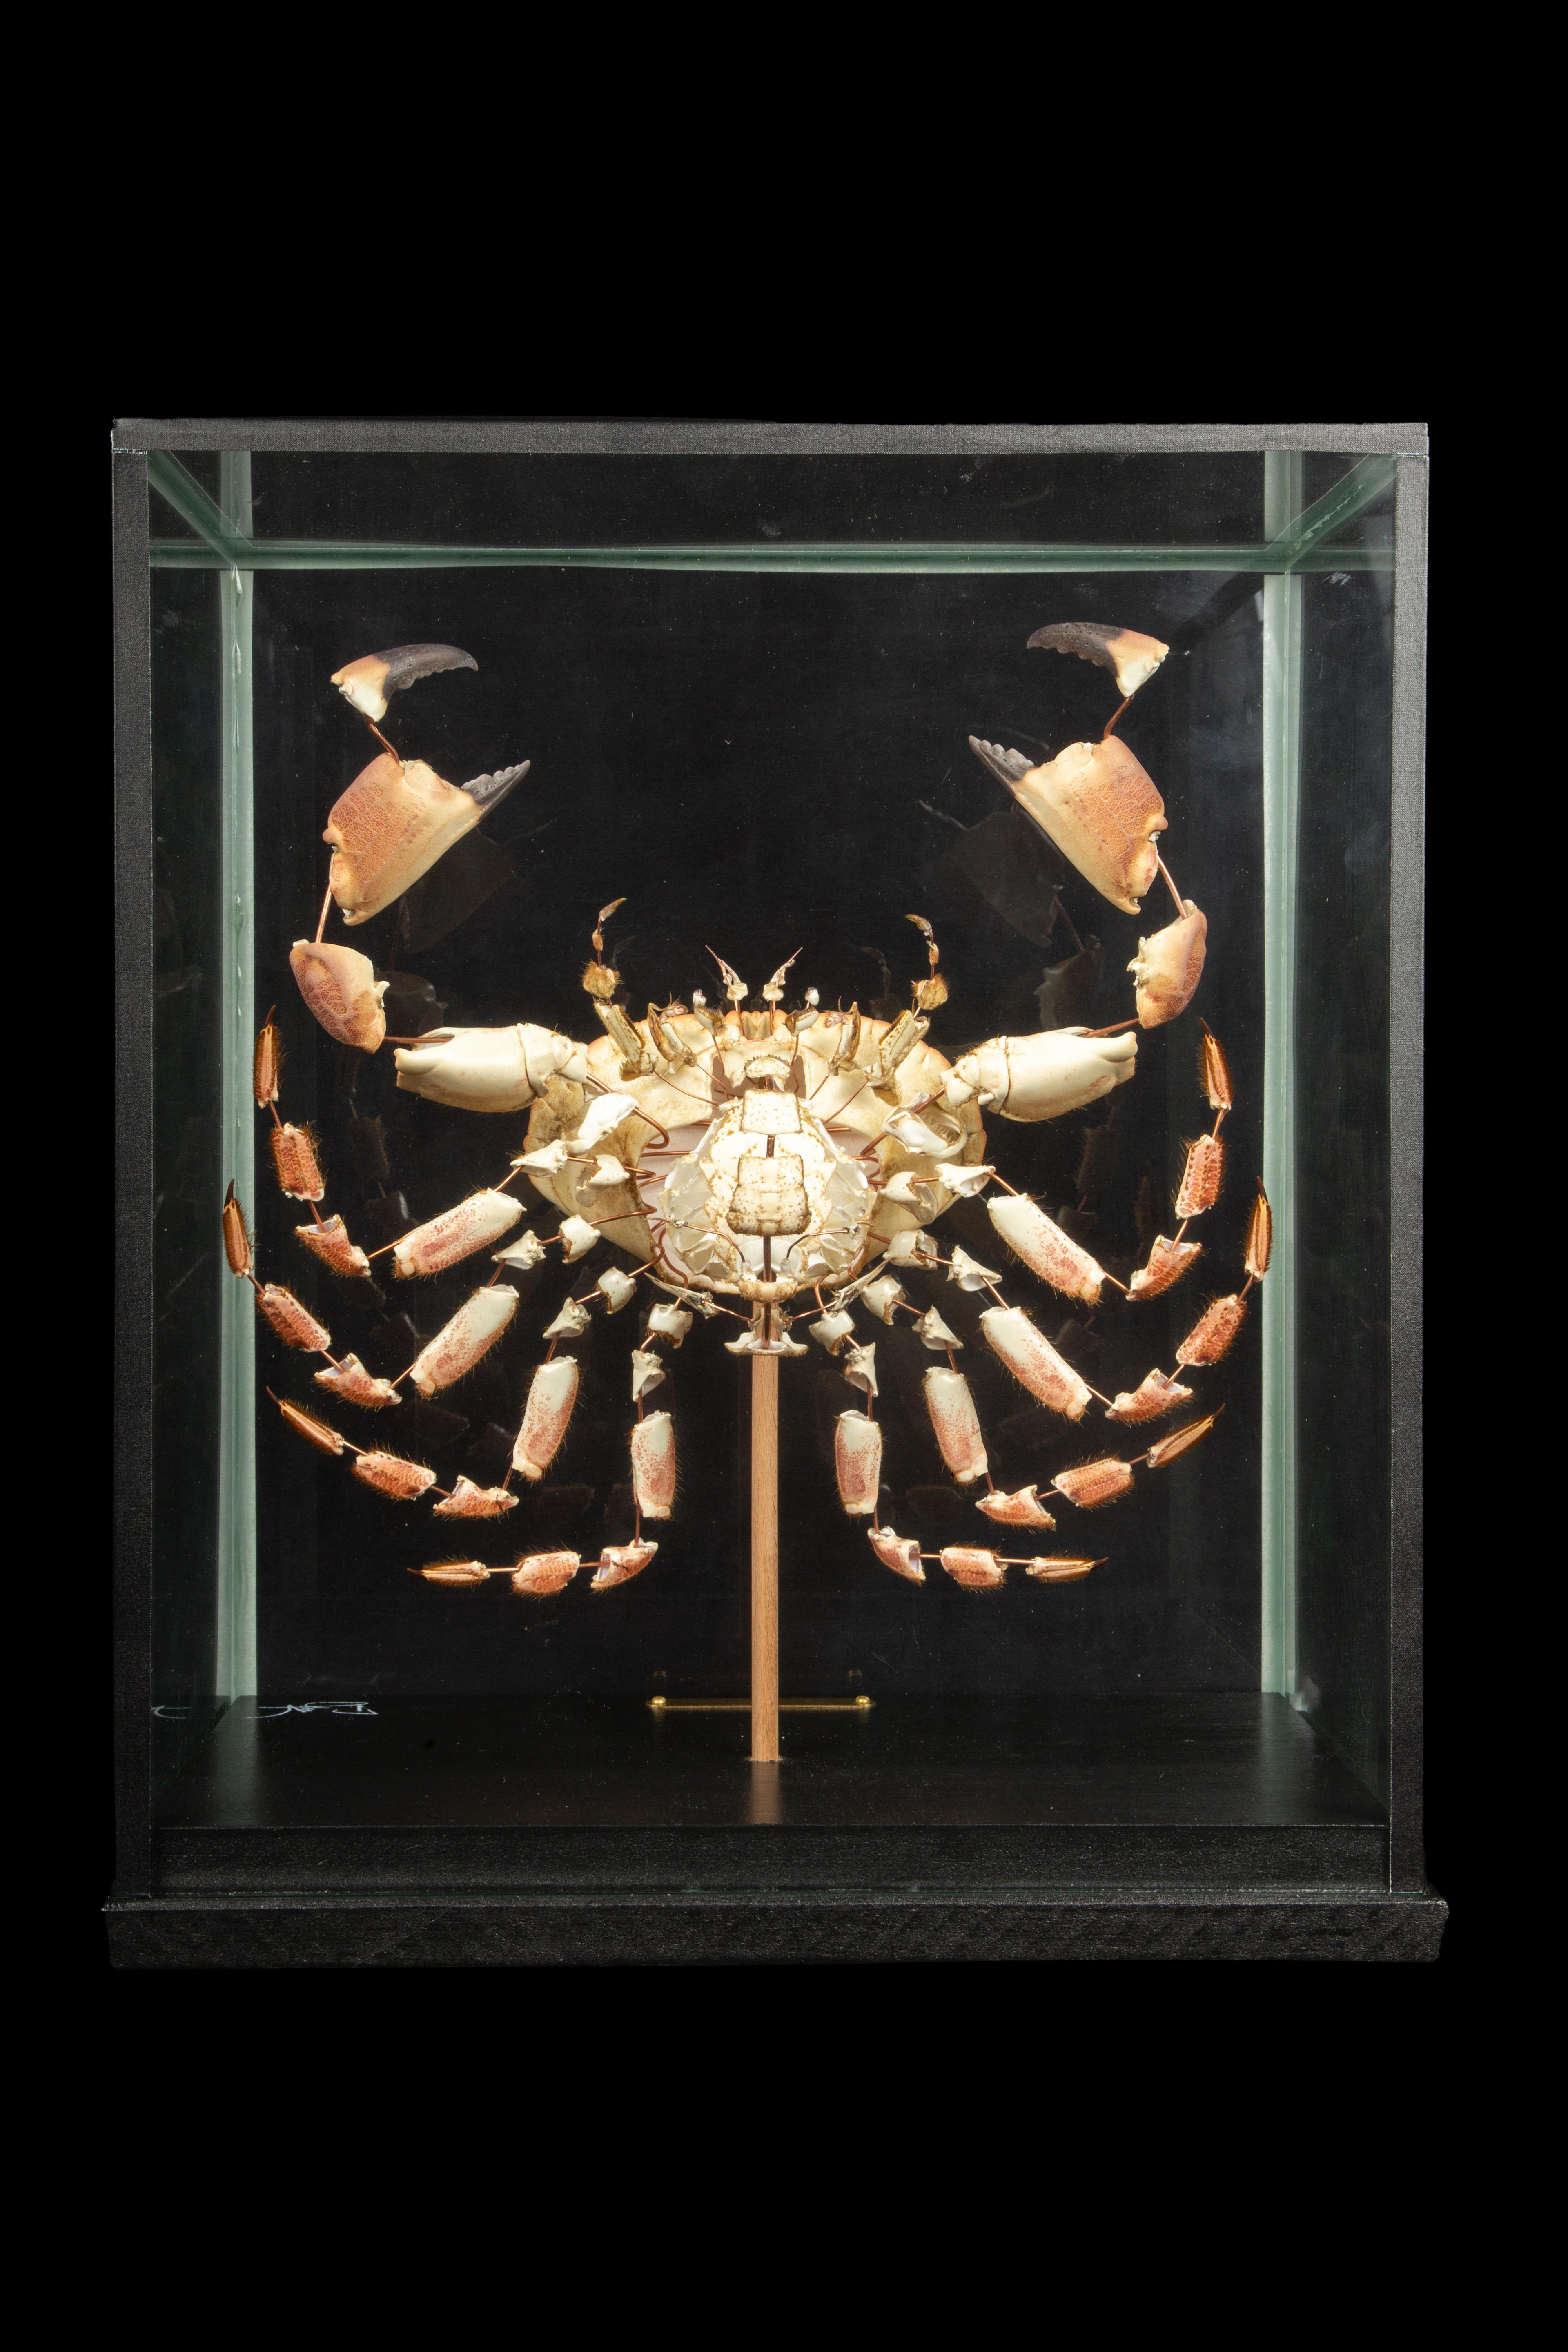 Other Large Deconstructed Brown Crab (Cancer Pagurus) in a Custom Glass Case